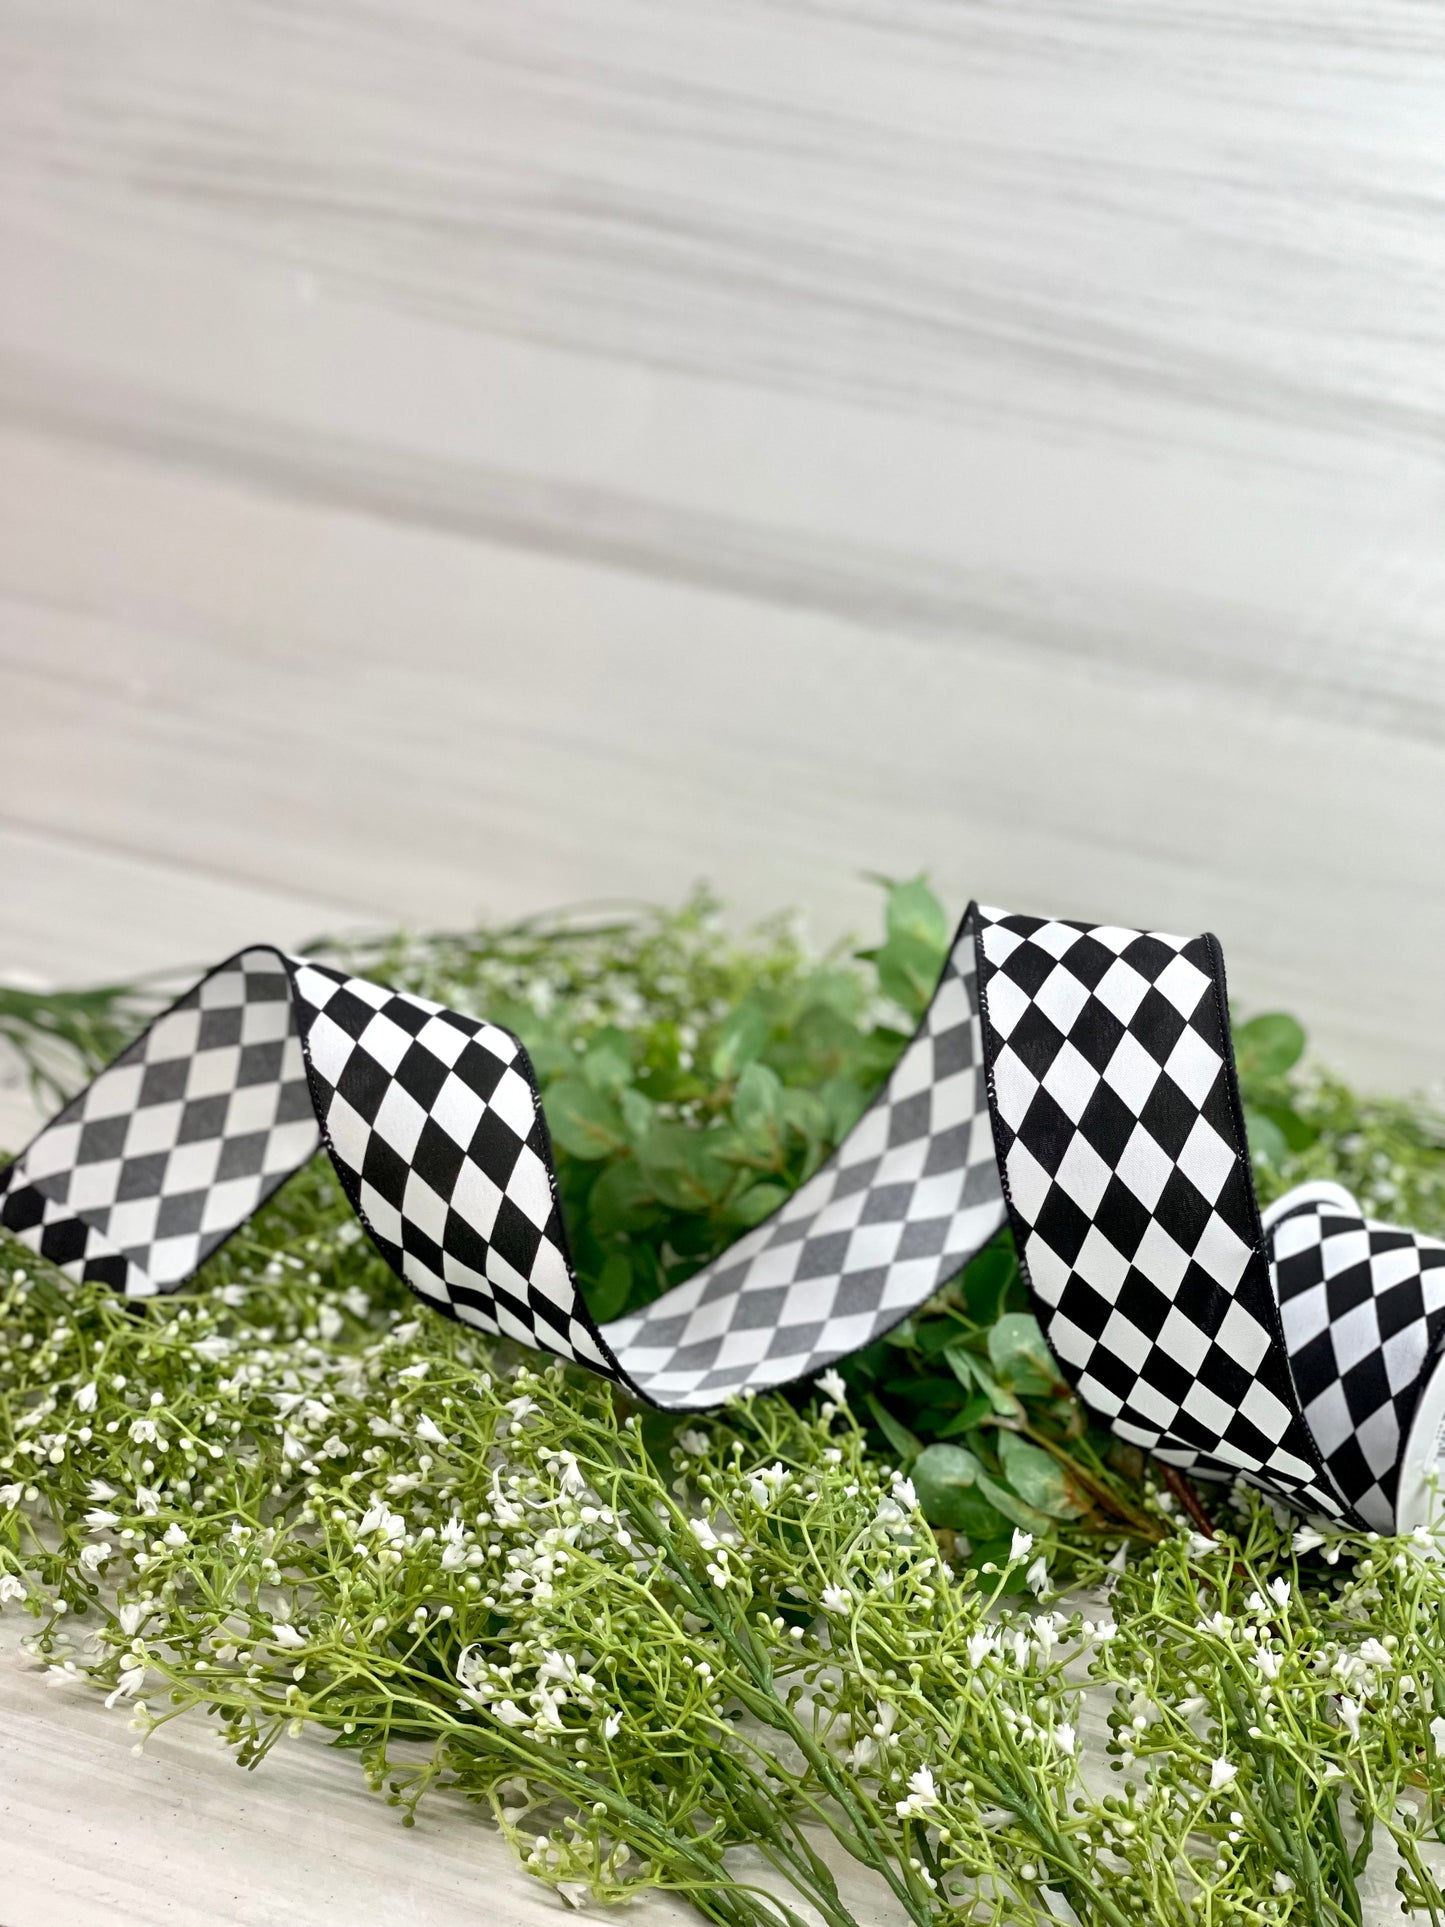 2.5 Inch By 10 Yard Black And White Harlequin Printed Ribbon